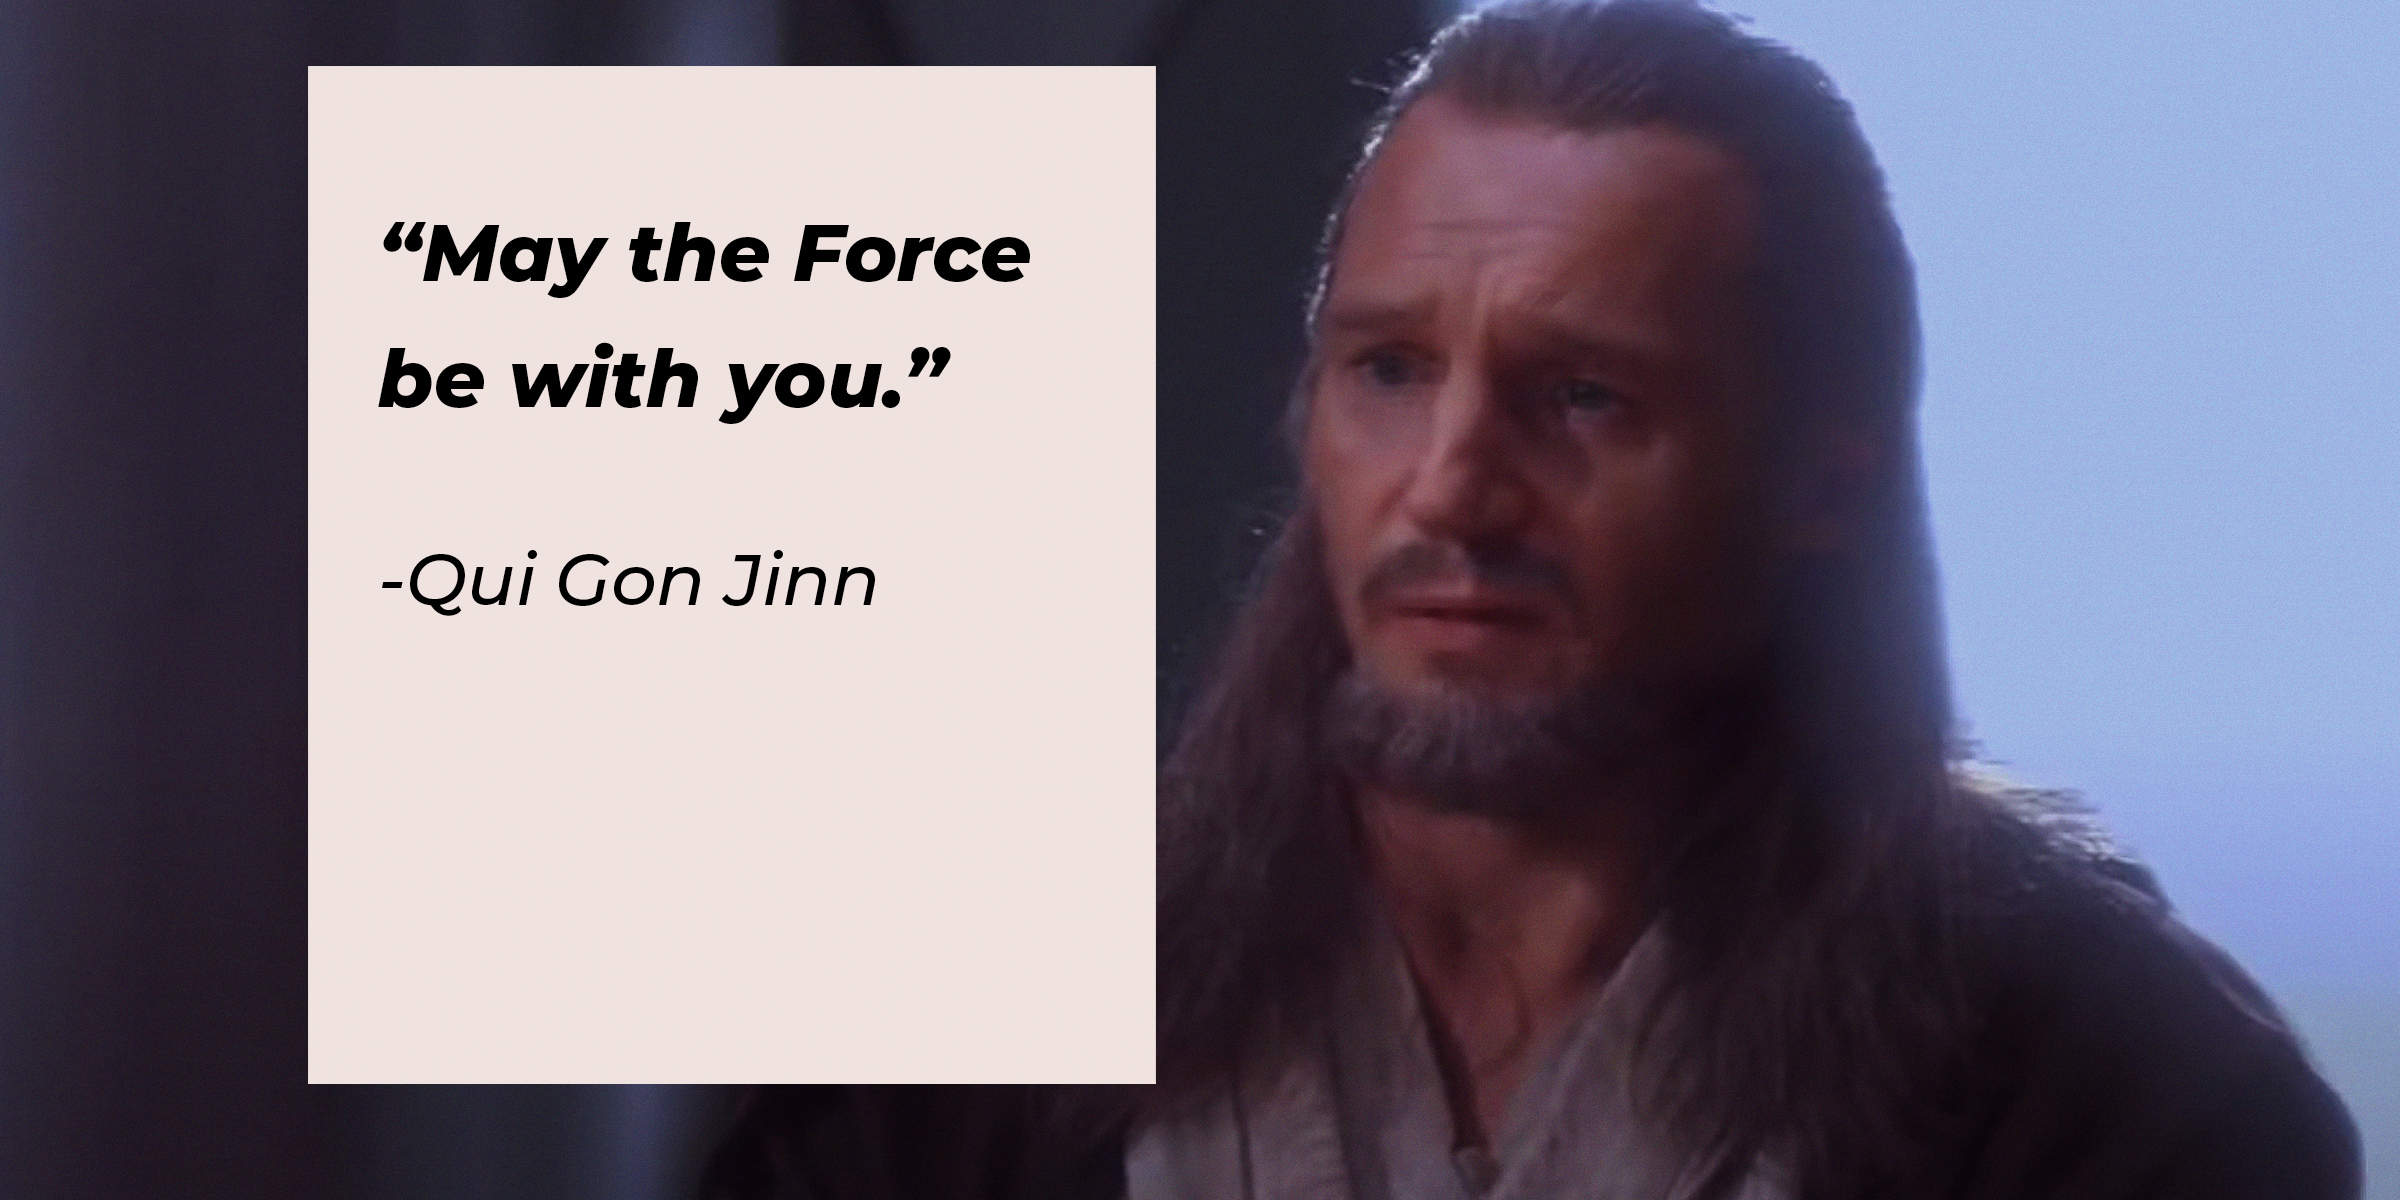 A picture of Qui Gon Jinn with a quote by him: “May the Force be with you.” | Source: facebook.com/StarWars